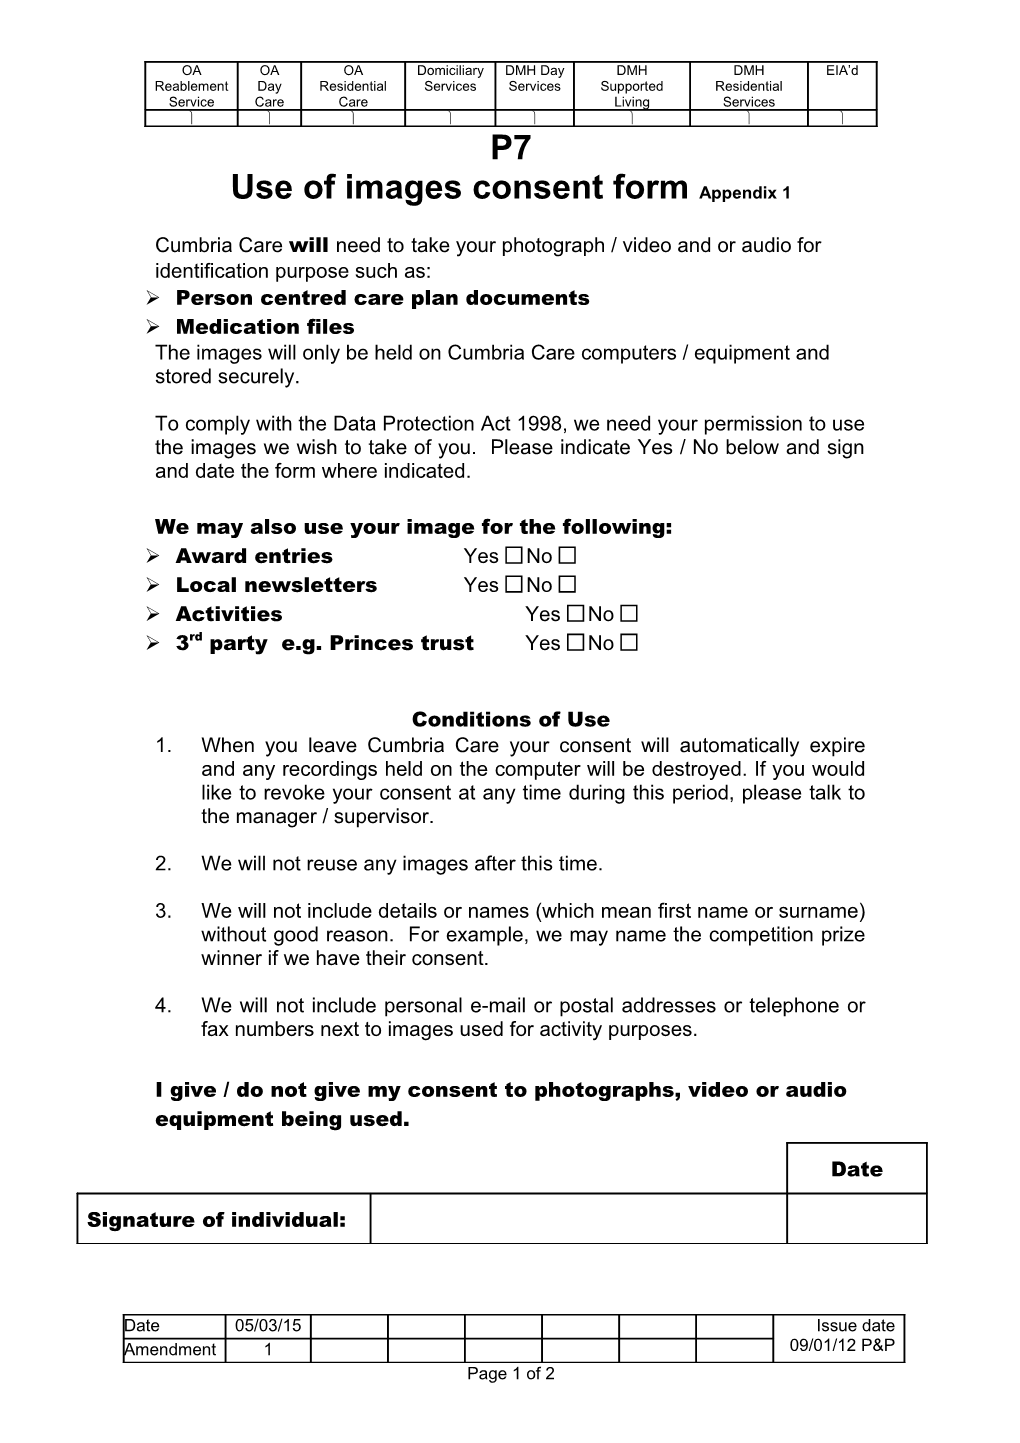 Use of Images Consent Form Appendix 1